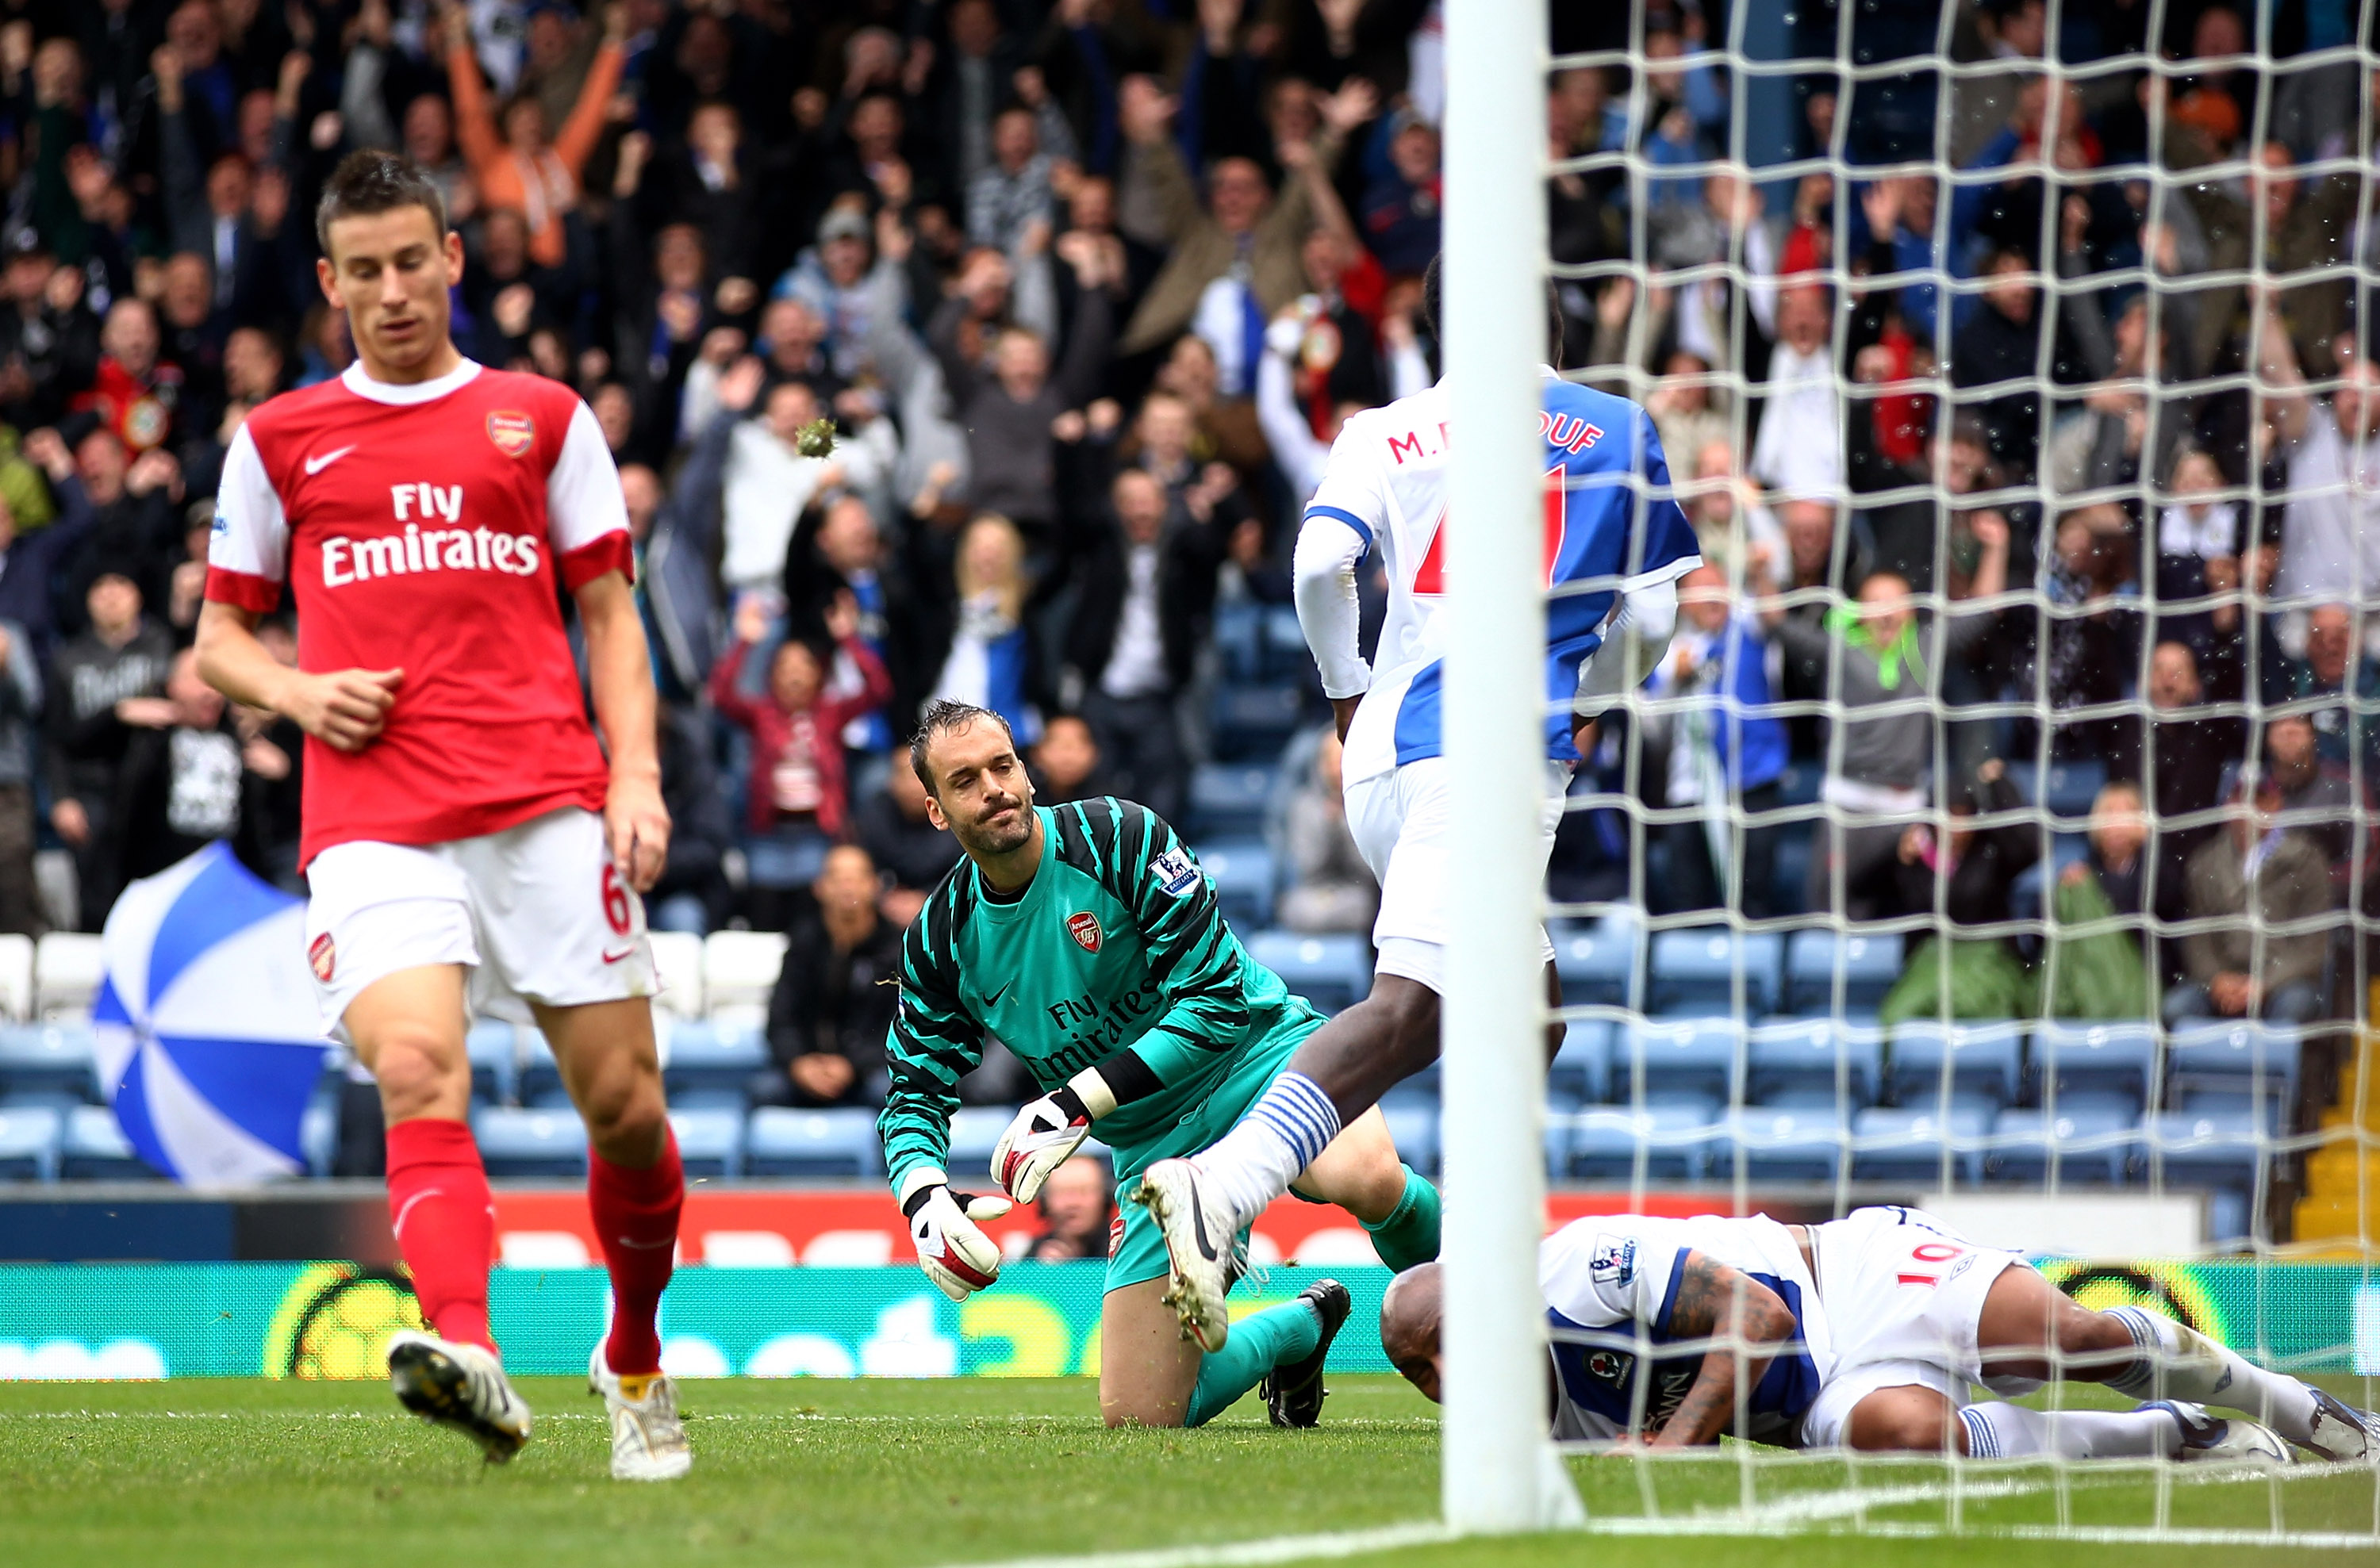 BLACKBURN, ENGLAND - AUGUST 28:  Manuel Almunia of Arsenal reacts as Mame Biram Diouf of Blackburn Rovers celebrates scoring his team's first goal during the Barclays Premier League match between Blackburn Rovers and Arsenal at Ewood Park on August 28, 20